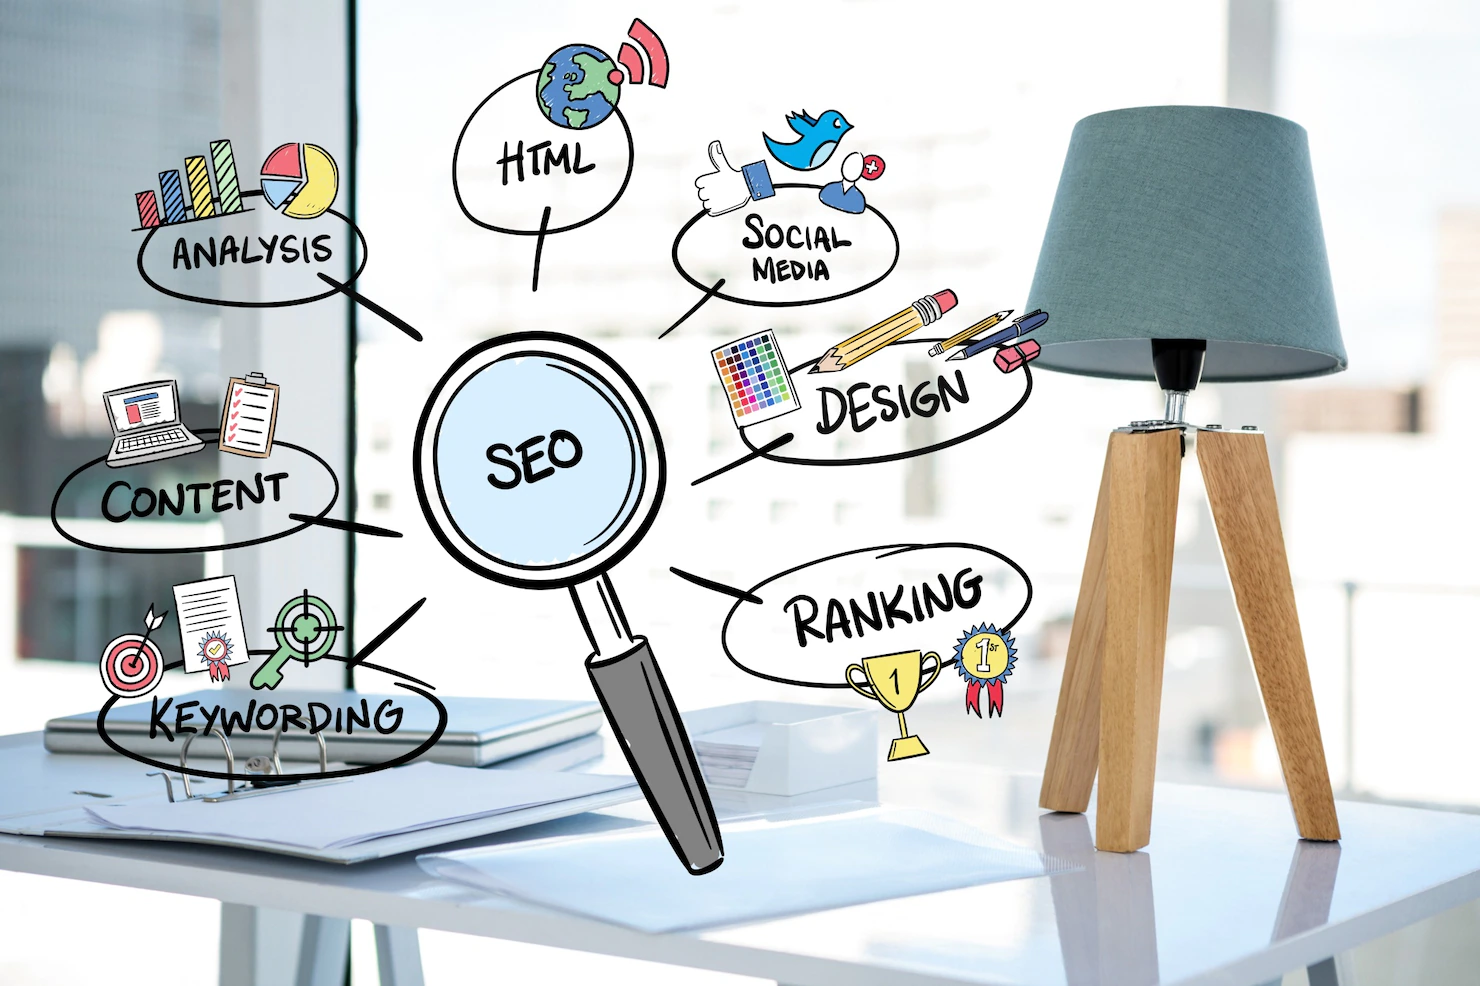 Educate employees on the importance of SEO